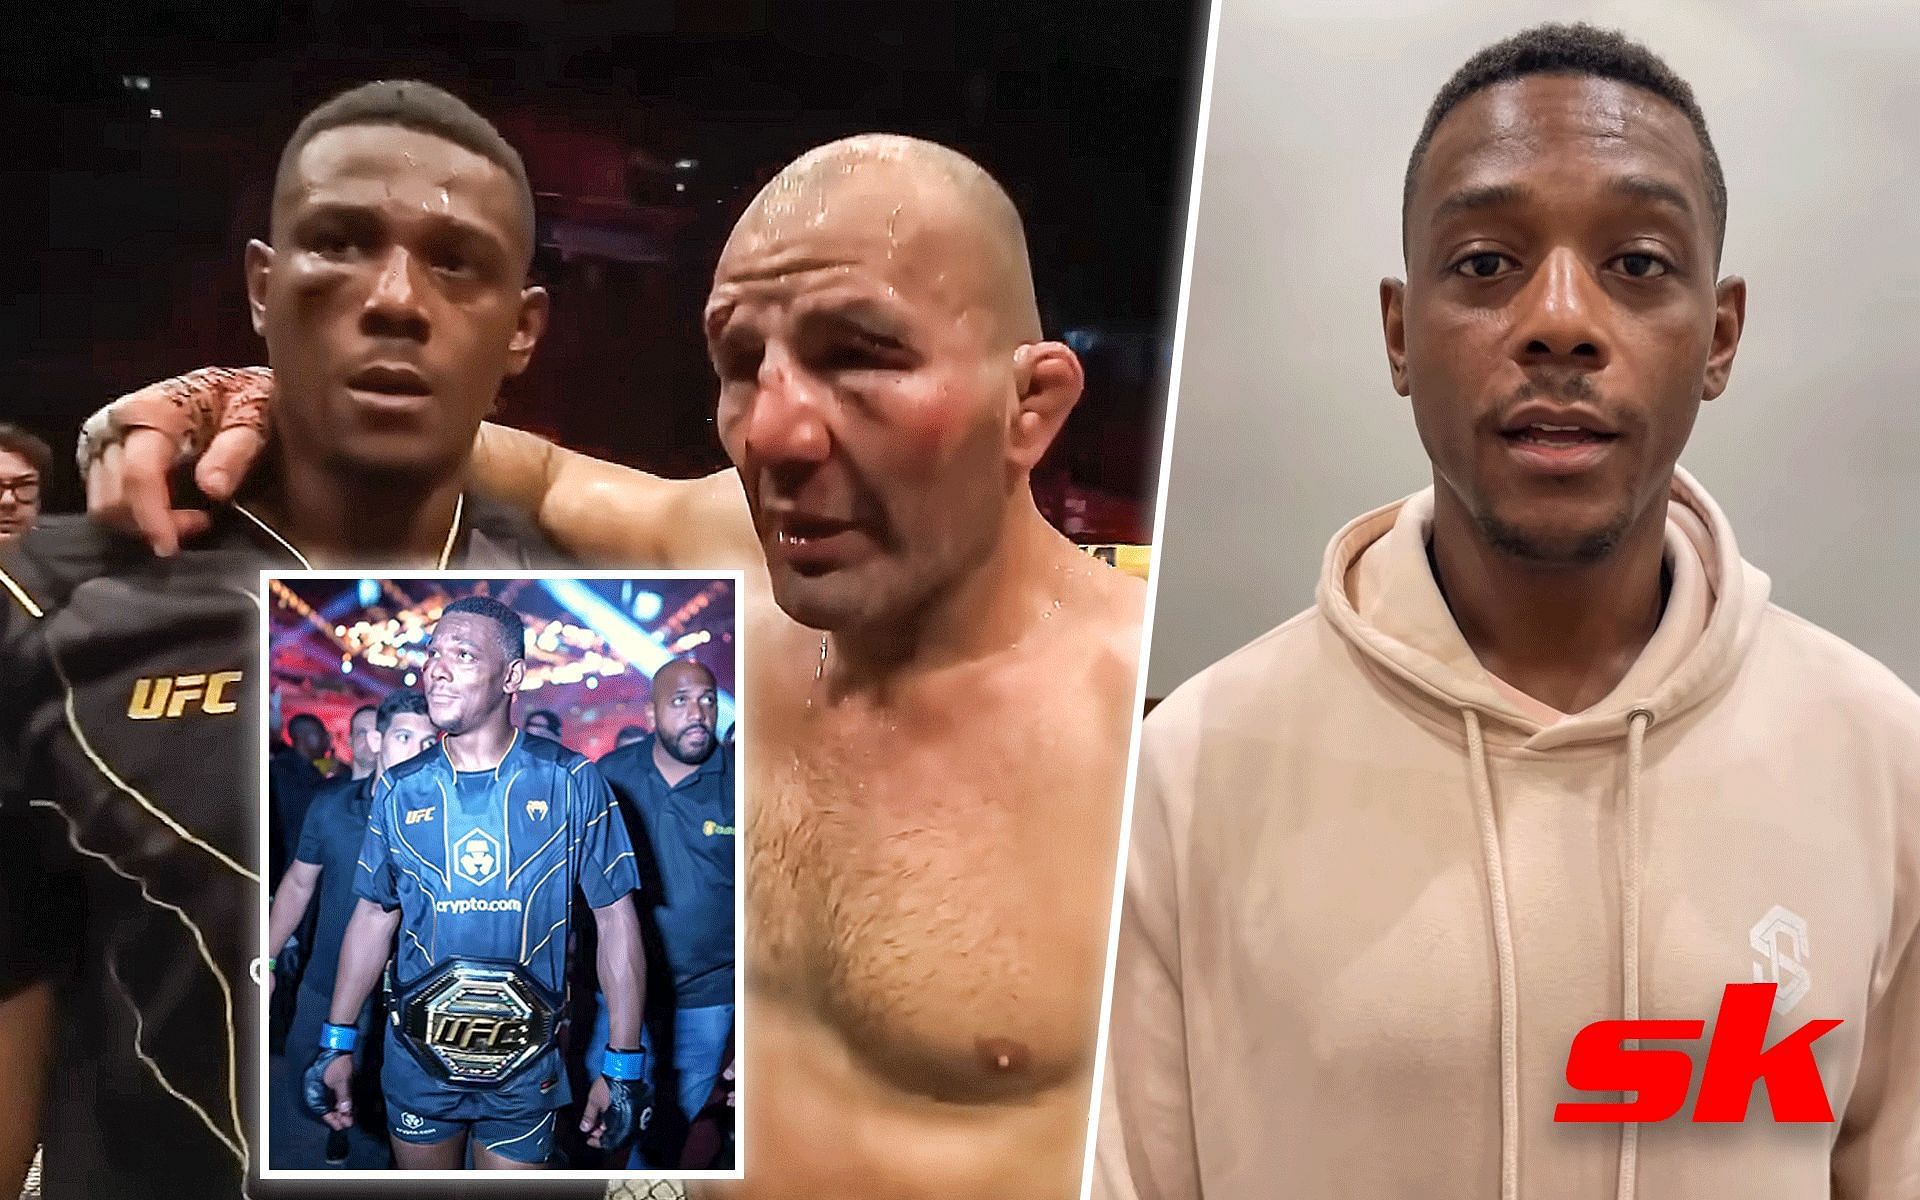 Jamahal Hill credits Glover Teixeira for preventing any untowards incidents after UFC 283 title fight [Images via: @Sweet_DreamsJHill, @ufc on Instagram, UFC - Ultimate Fighting Championship on YouTube]